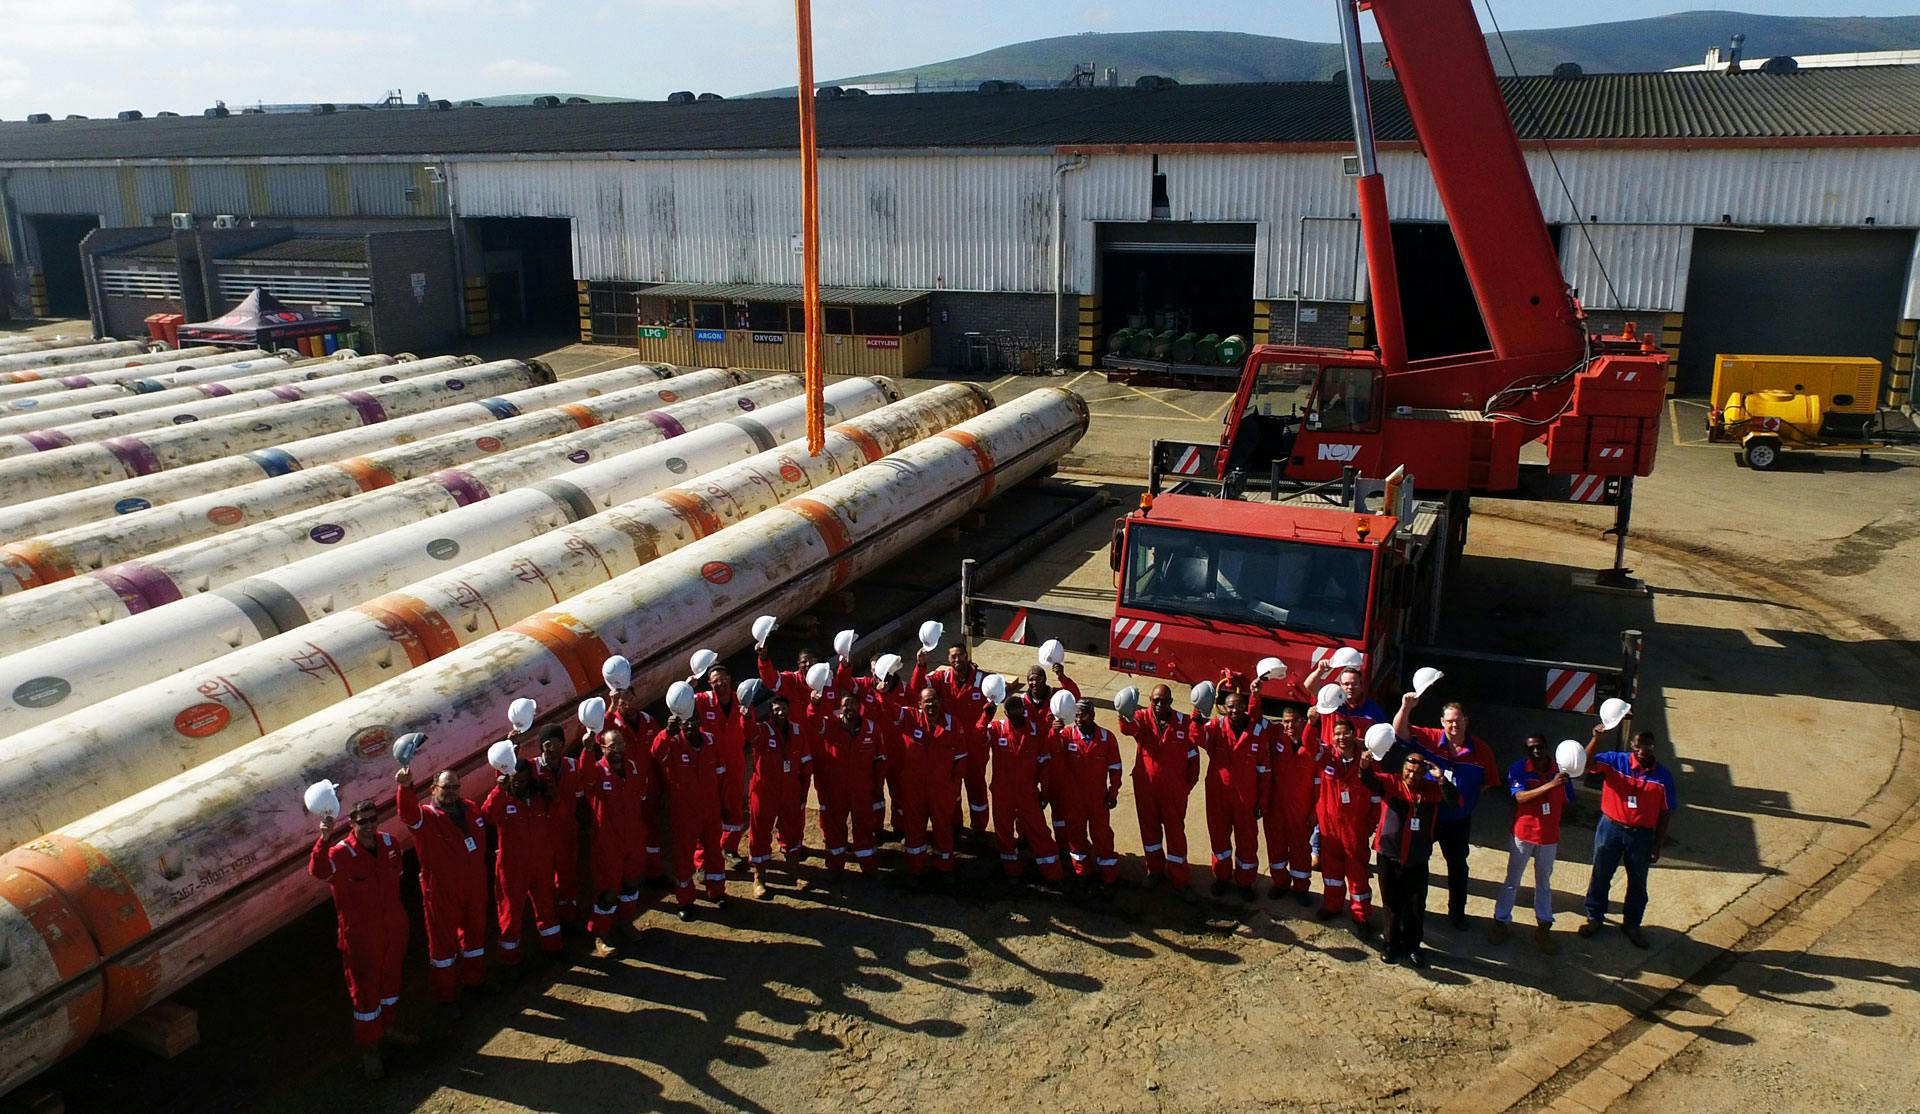 The NOV riser team at a facility with a red crane and tubing in the shot